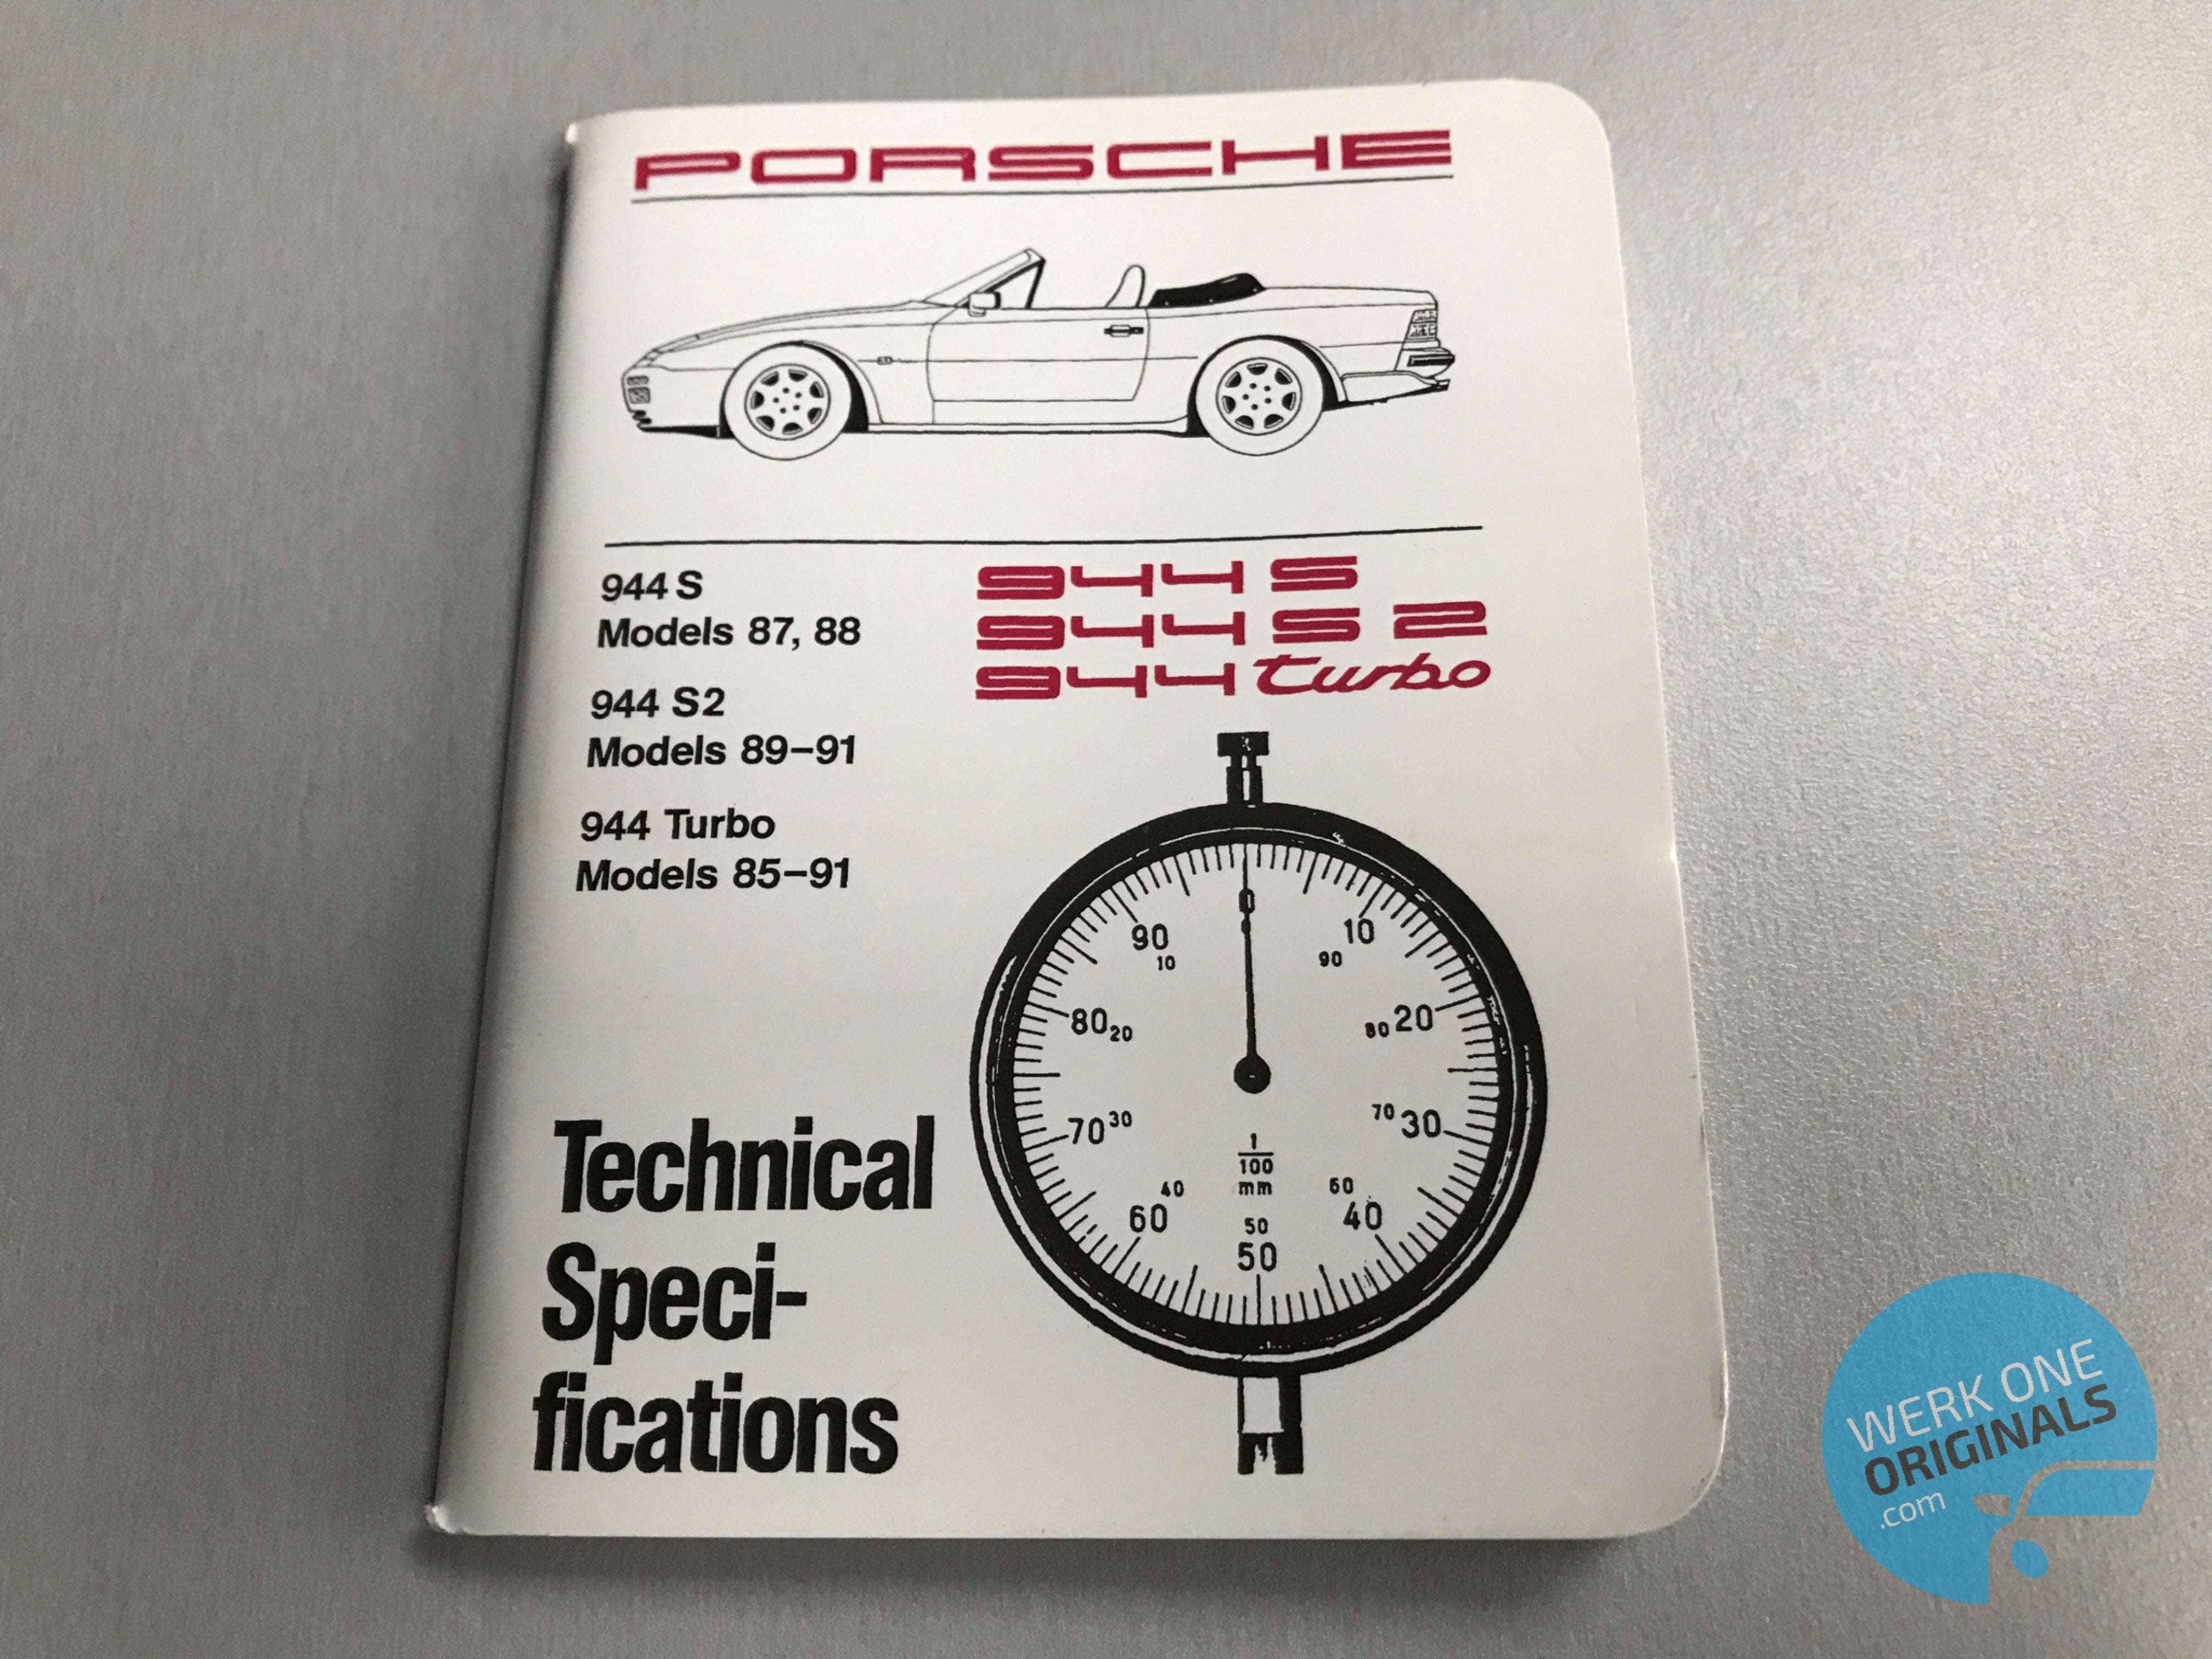 Porsche Technical Specification Manual for 944S, 944S2 & 944 Turbo Models (1985 - 1991)